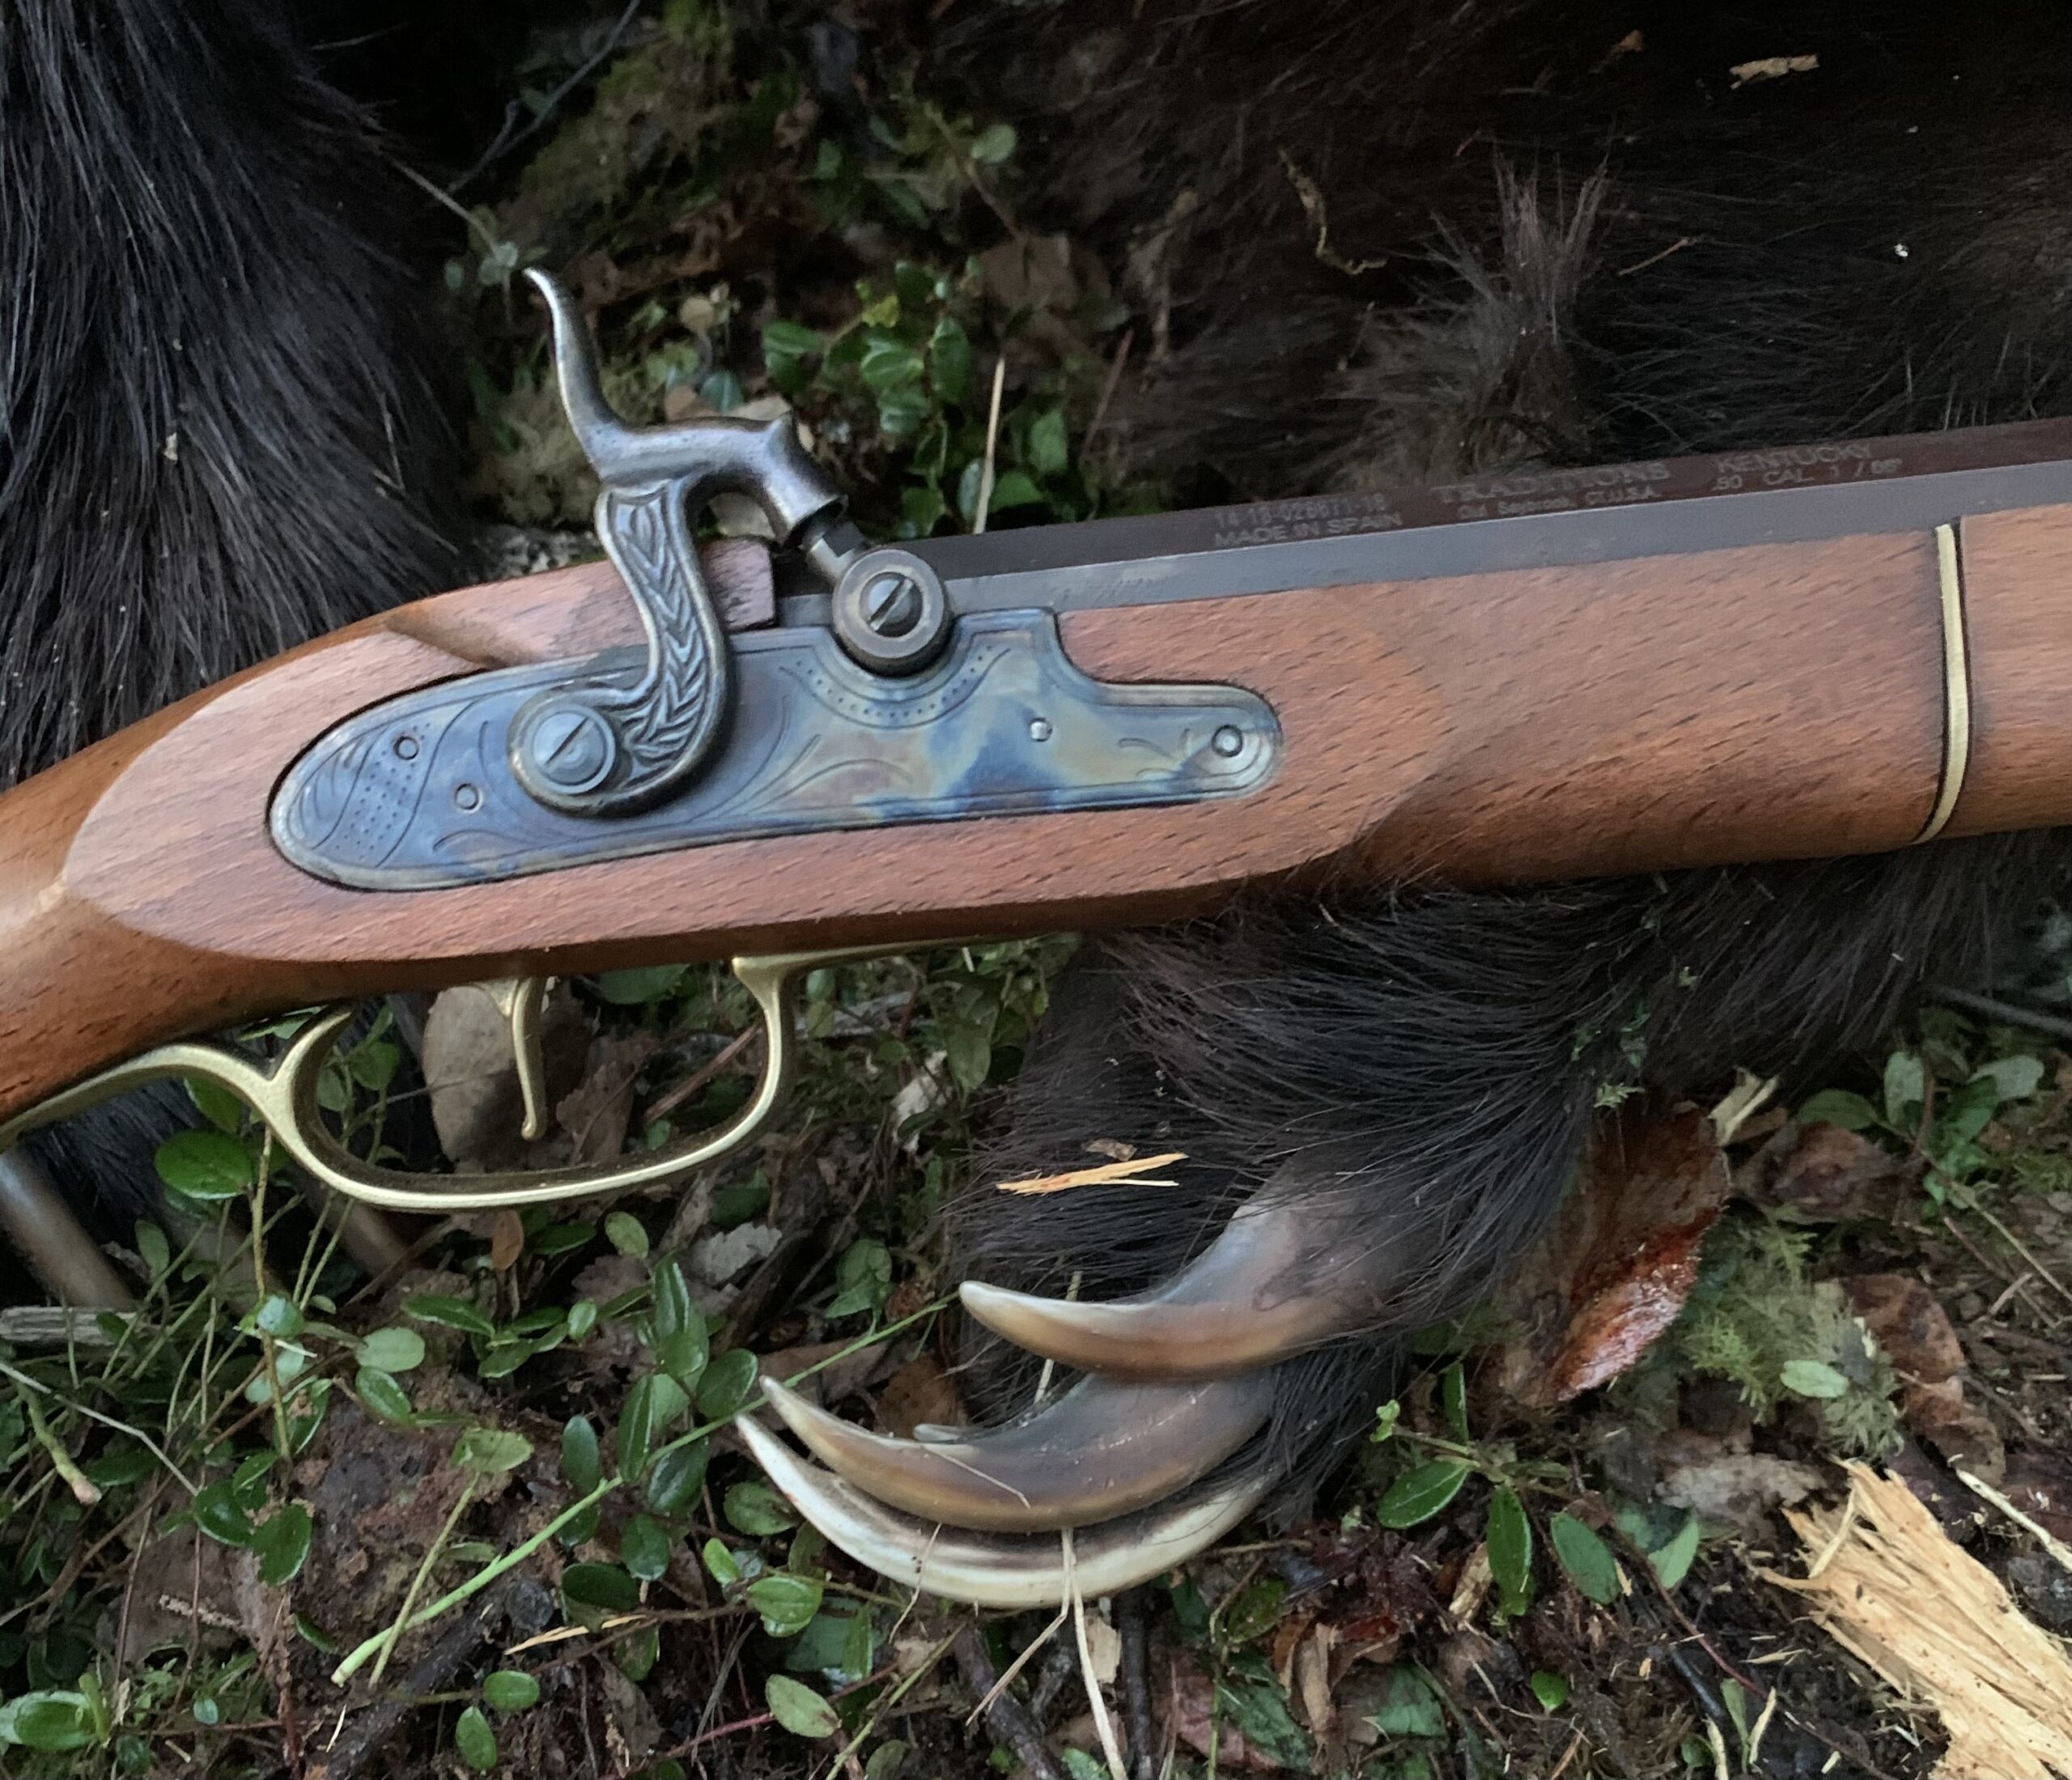 A close-up of a brown rifle